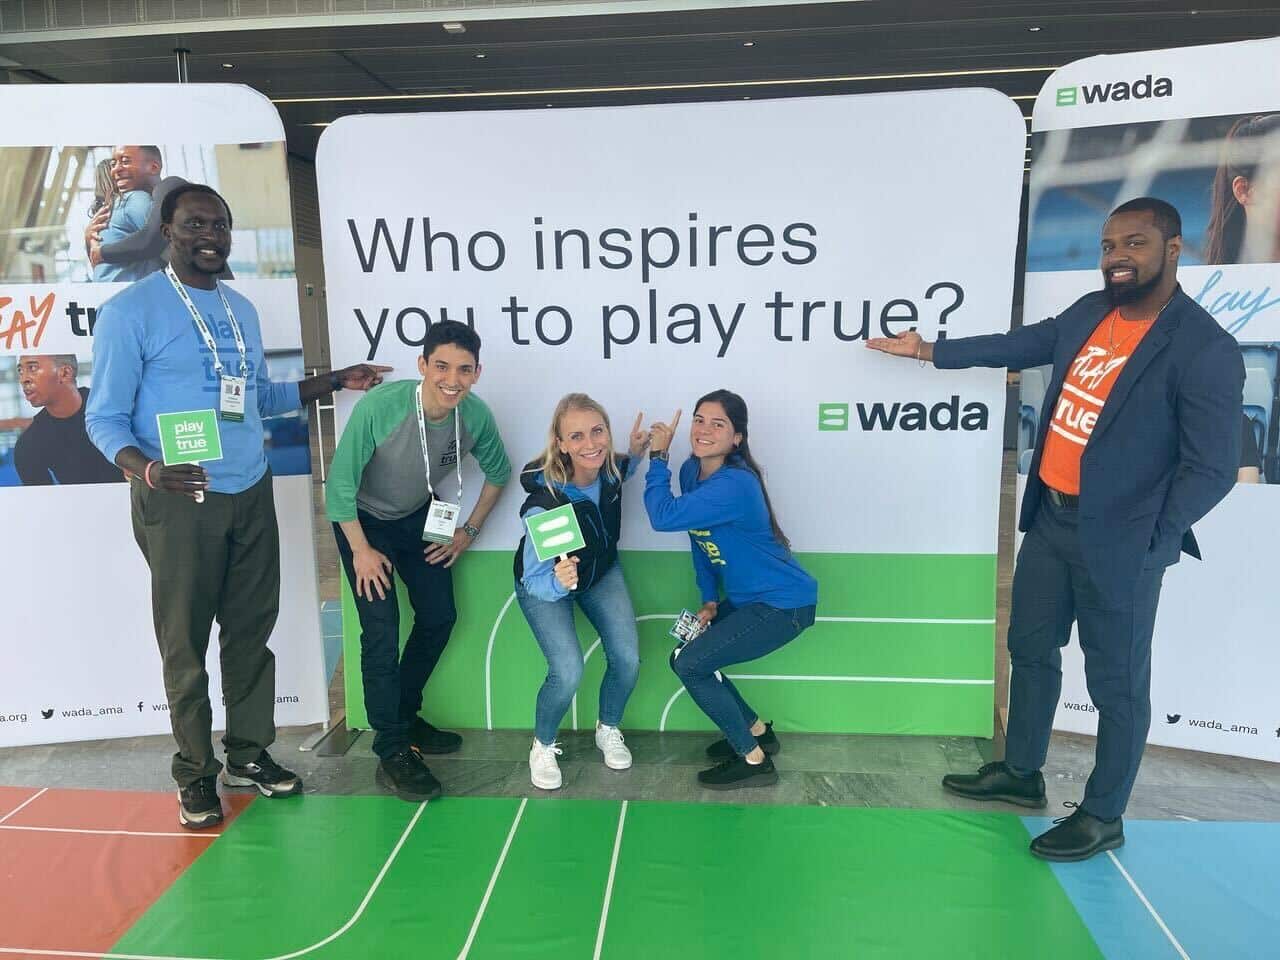 Adriana Escobar with colleagues in front of WADA standing display